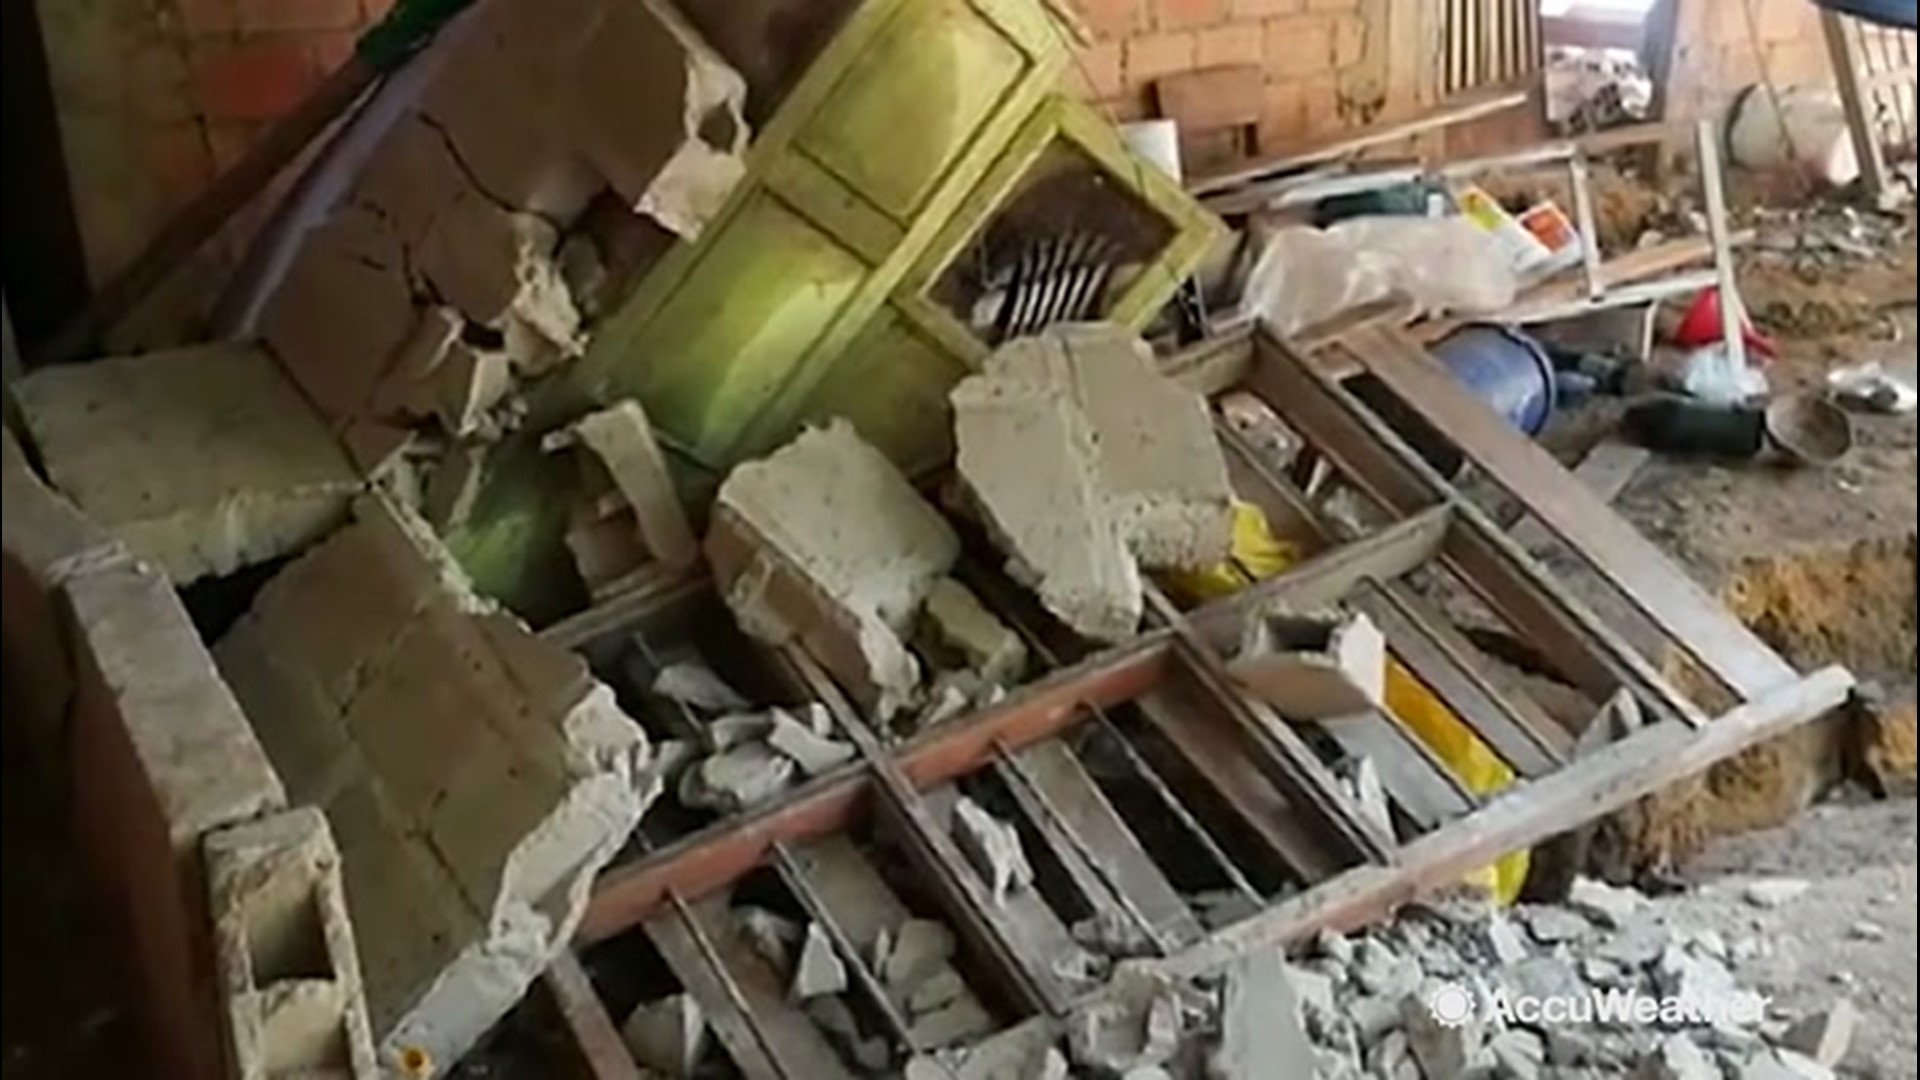 At least one person was killed and several were injured as a powerful 8.0 magnitude earthquake rocked parts of Peru on May 26. This video was shot in Tarapoto, where several structures were destroyed.